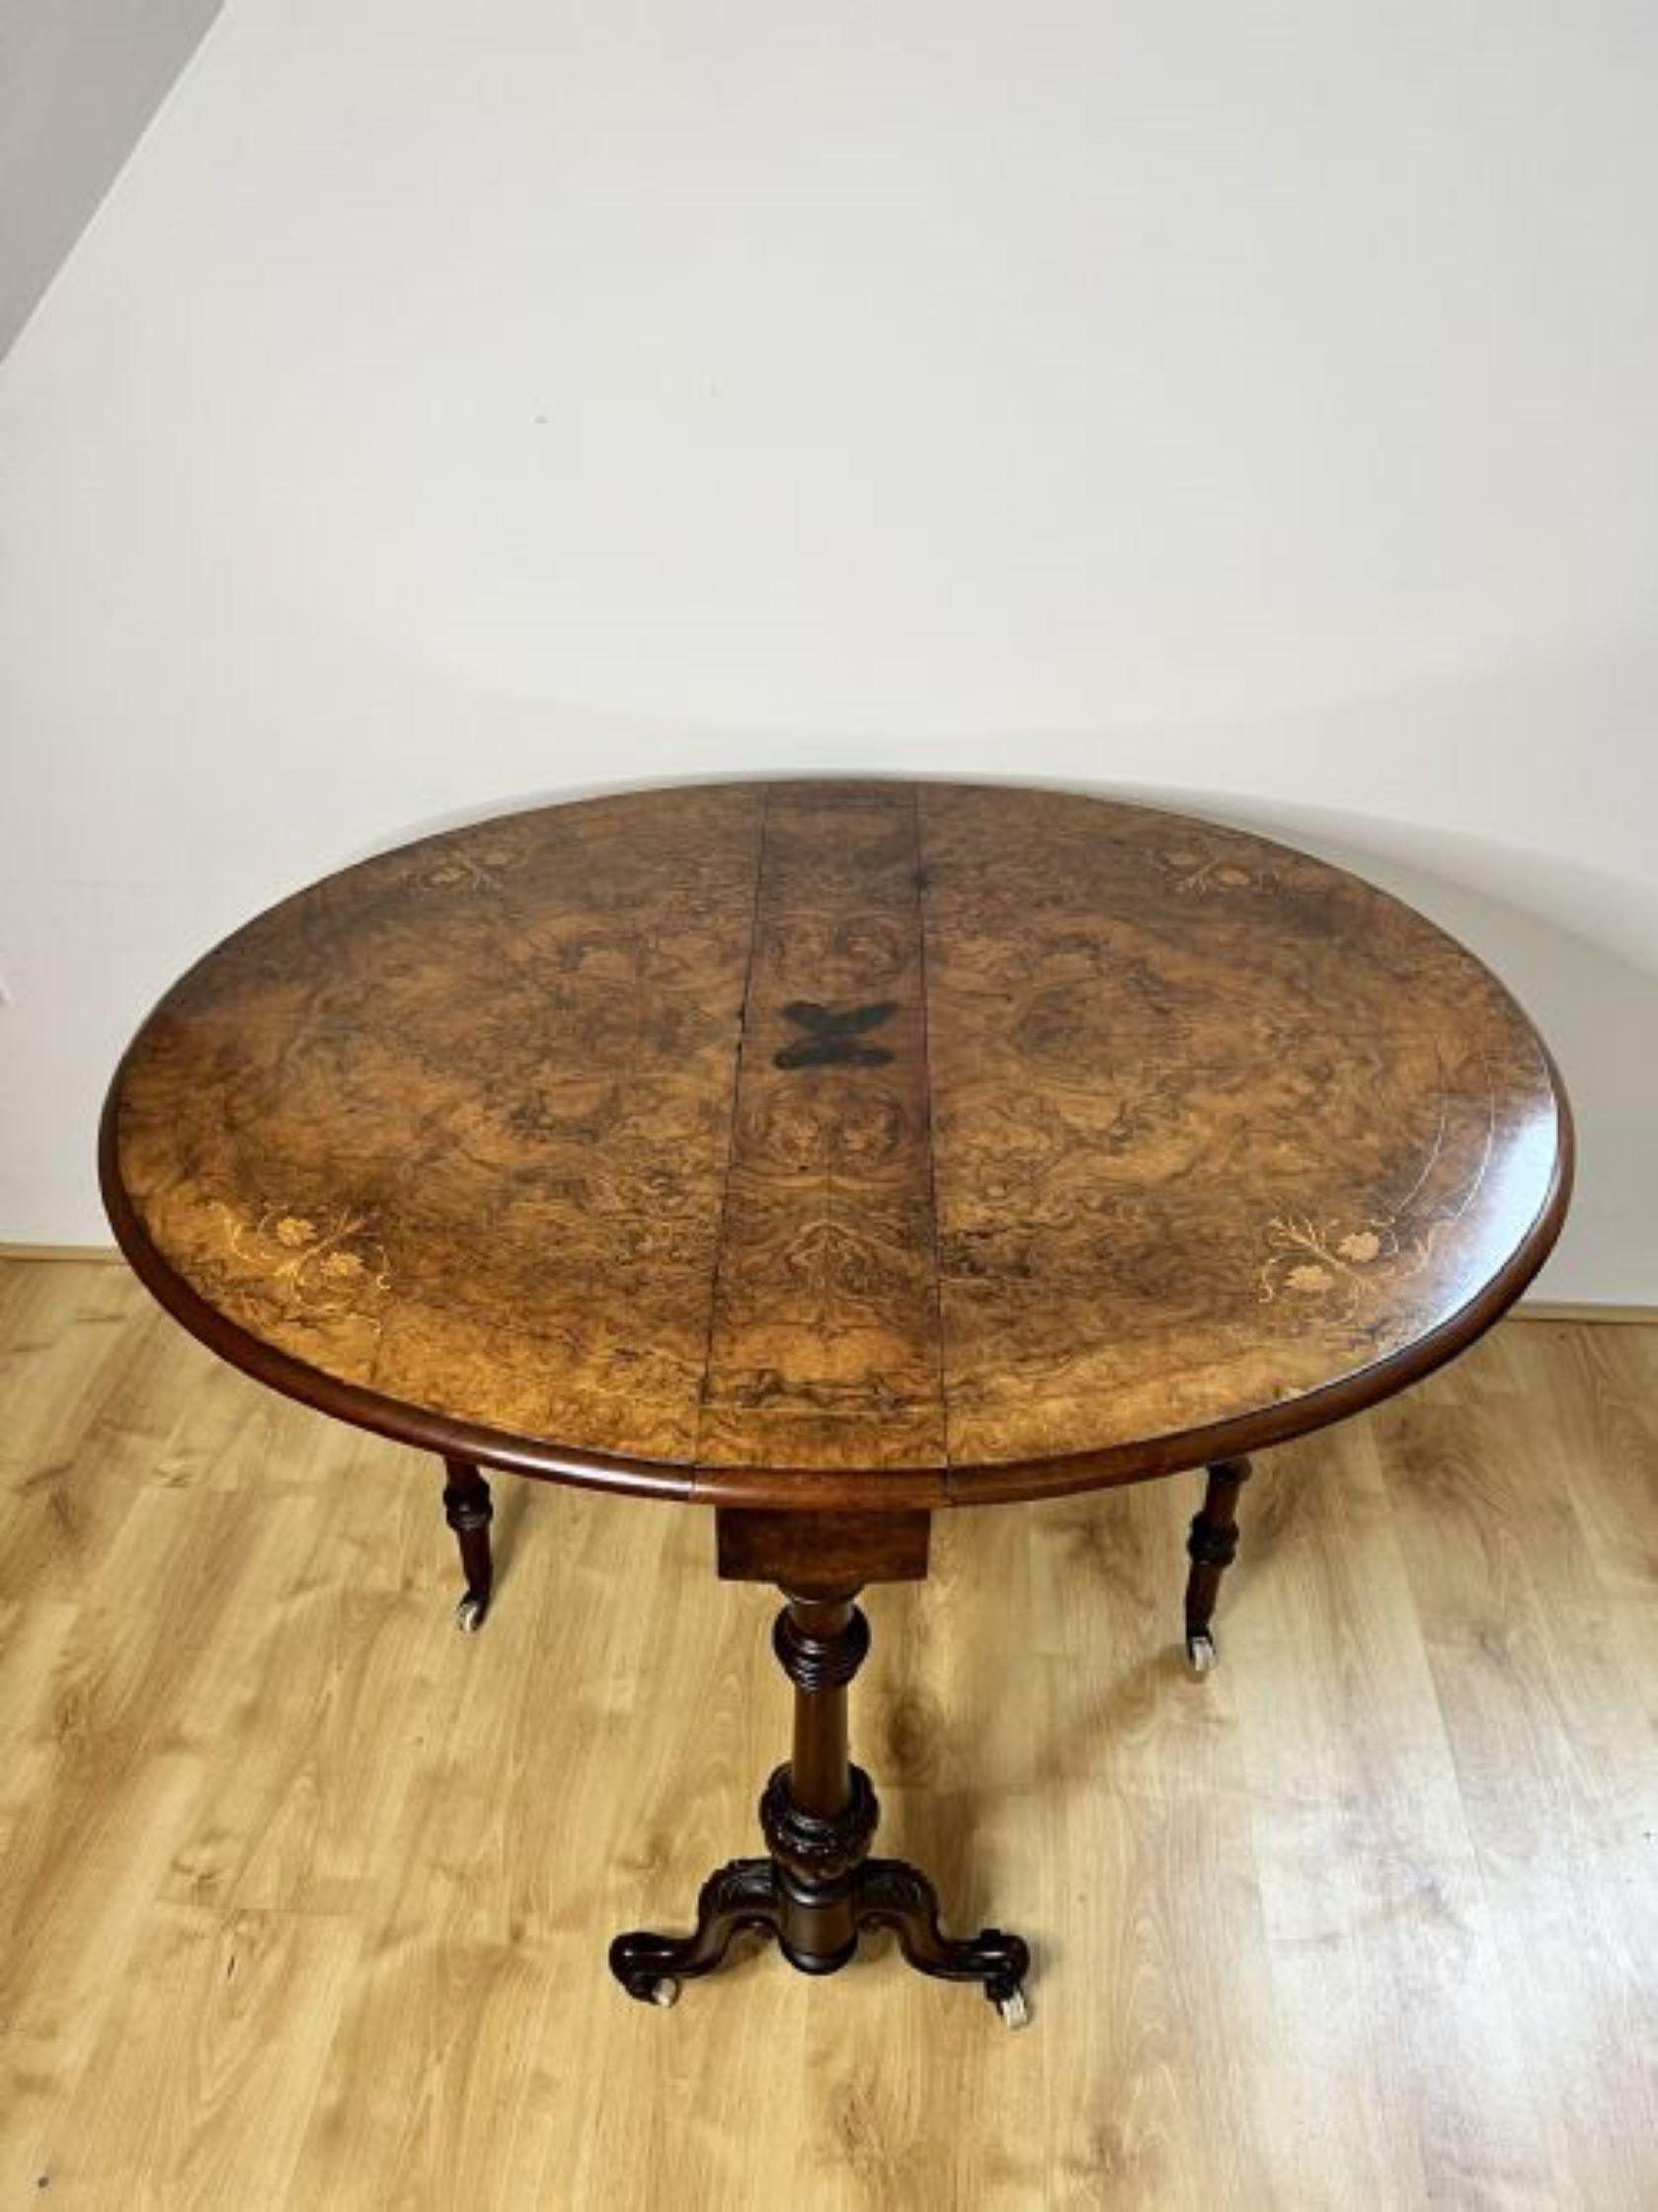 Fantastic quality antique Victorian burr walnut inlaid Sutherland table having a fantastic quality  burr walnut dropside gateleg table with inlaid flowers and stringing to top, quality stretcher to base, on the original castors.

Dimensions open
W